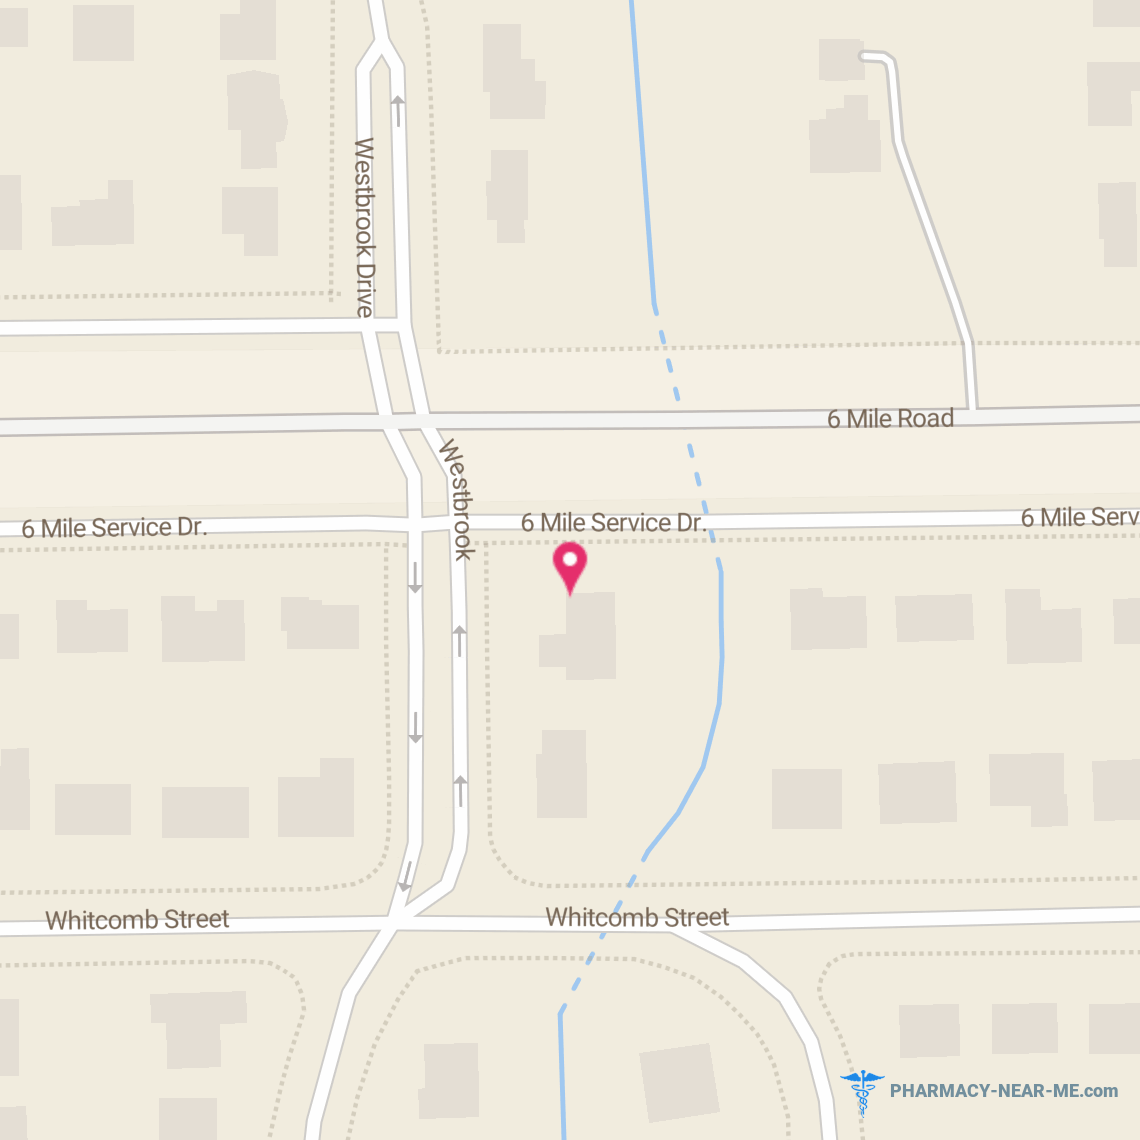 WALGREENS #06359 - Pharmacy Hours, Phone, Reviews & Information: 33333 6 Mile Rd, Livonia, Michigan 48154, United States